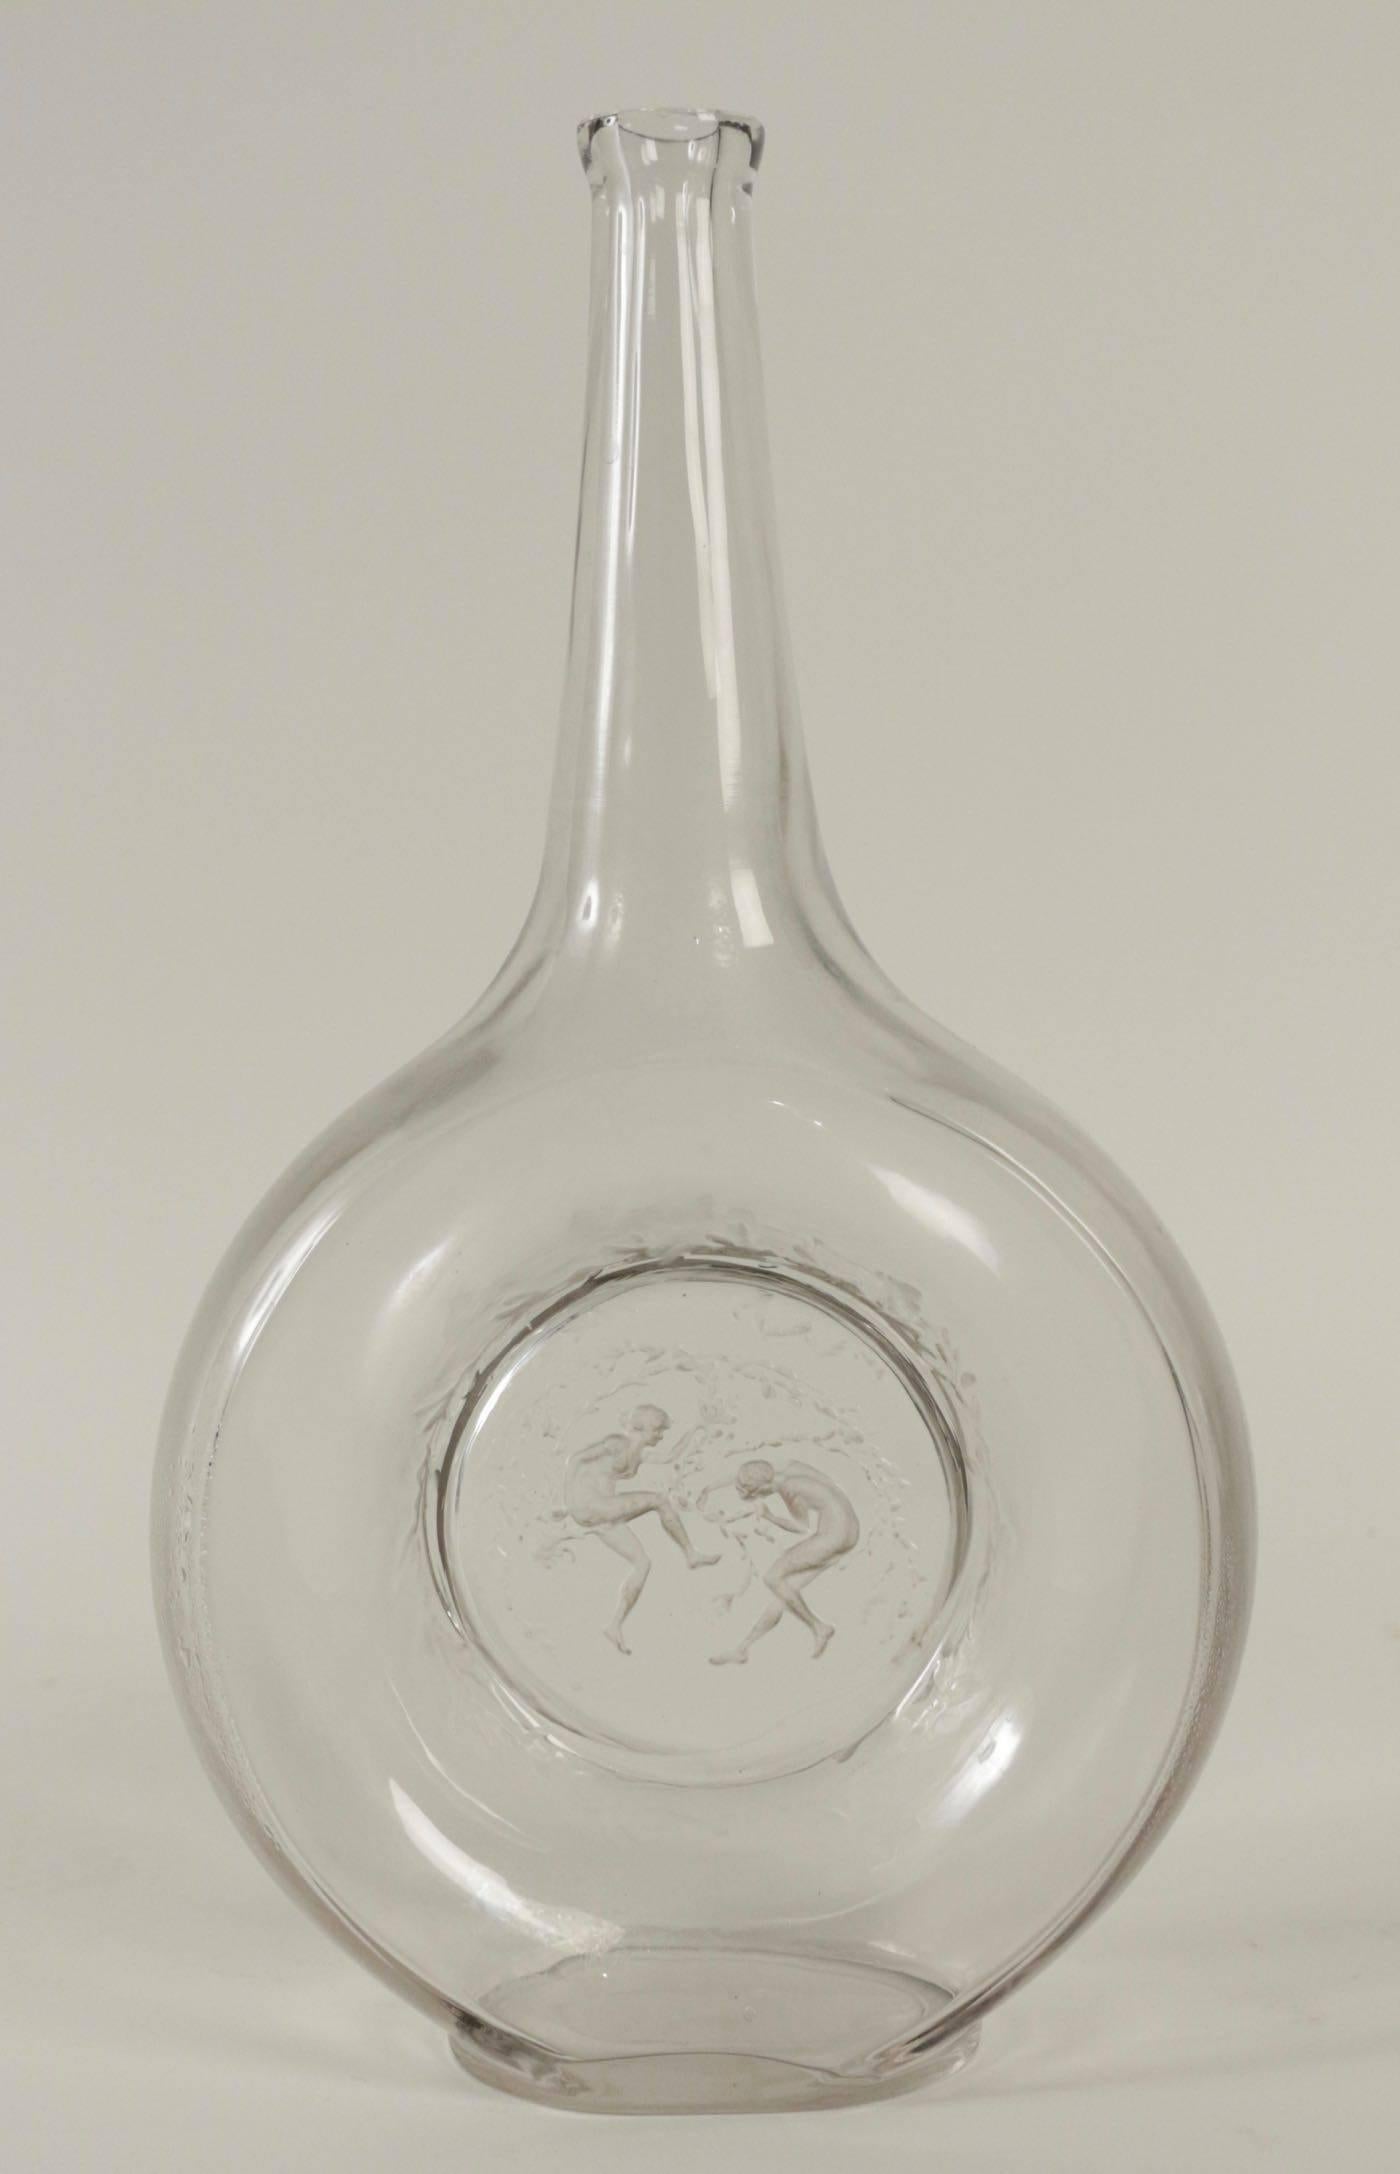 Clear glass long necked R. Laique decanter with the circular lower section having a central design of two dancers
hand writing signature
Lalique Carafe Deux Danseuses: 13 and 1/4 inches tall clear glass with a recessed central design of two